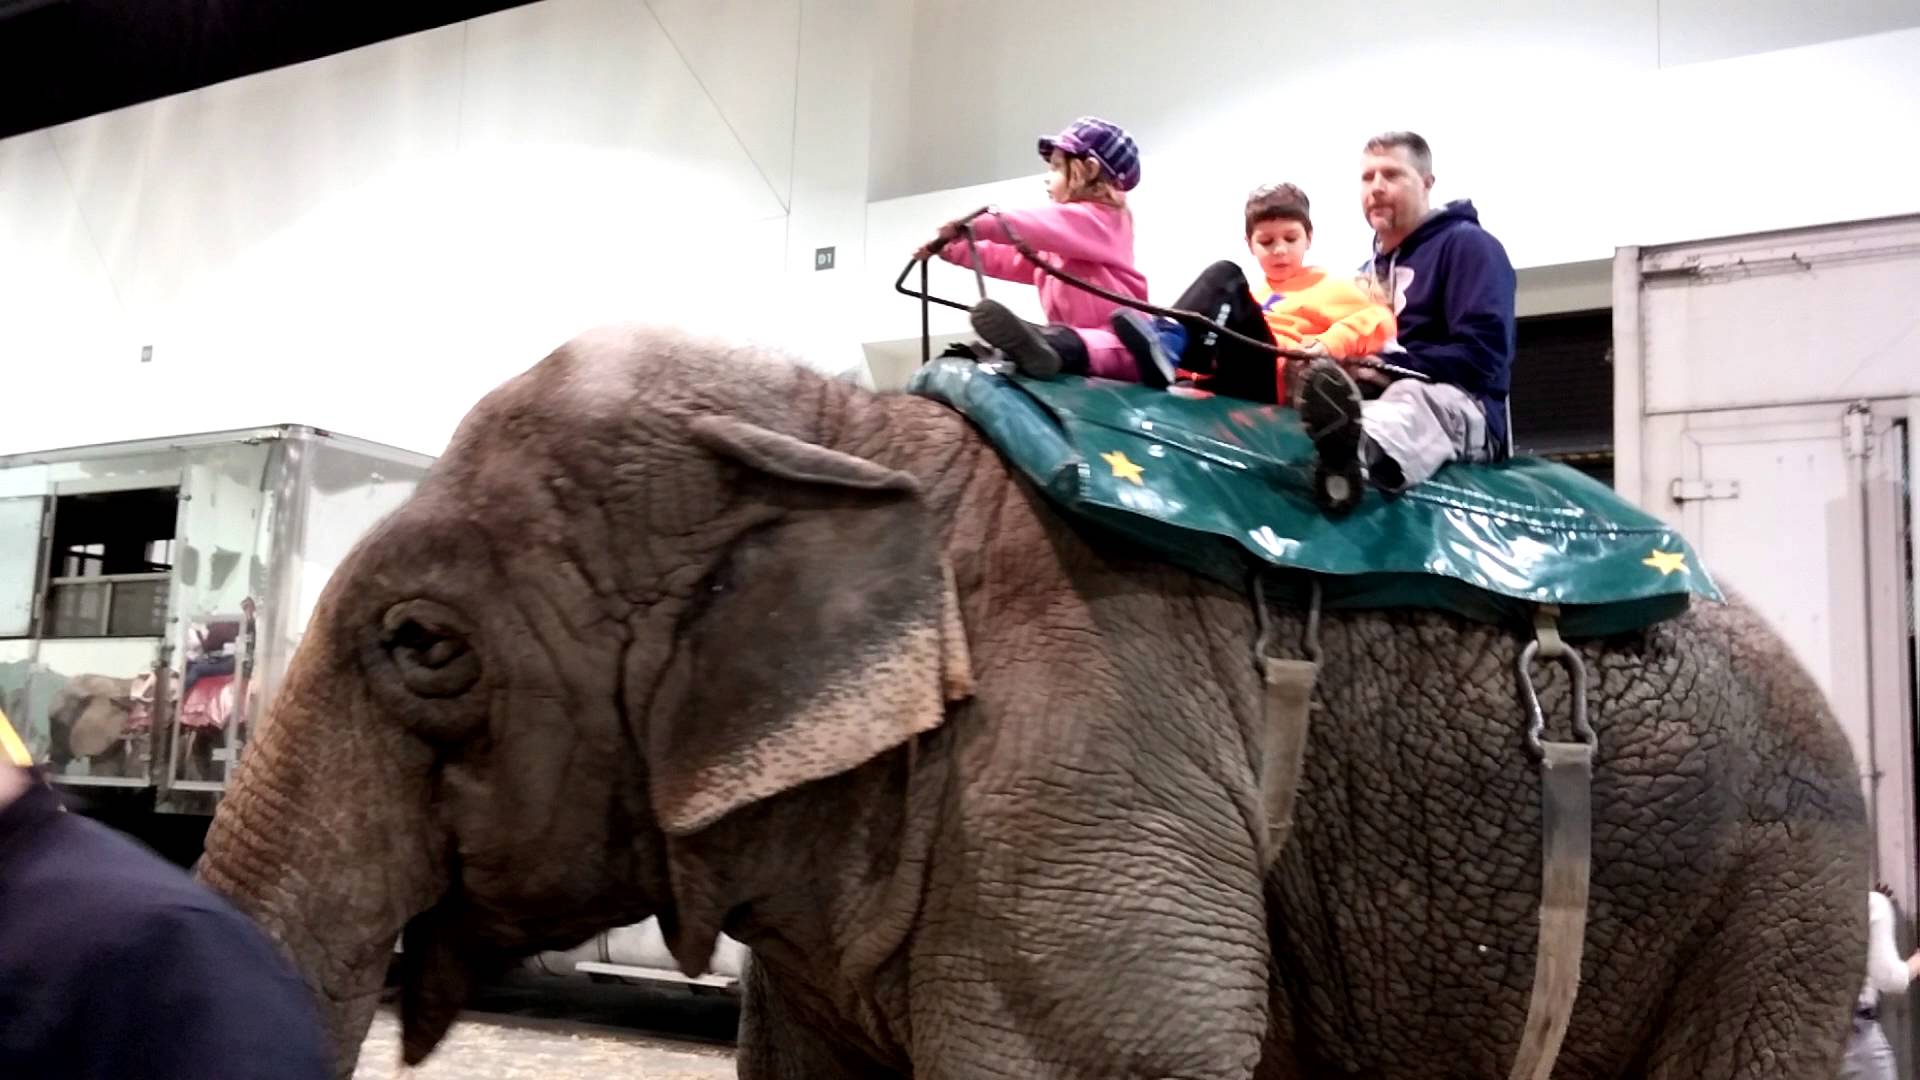 Chris and the kids riding the elephant. - YouTube